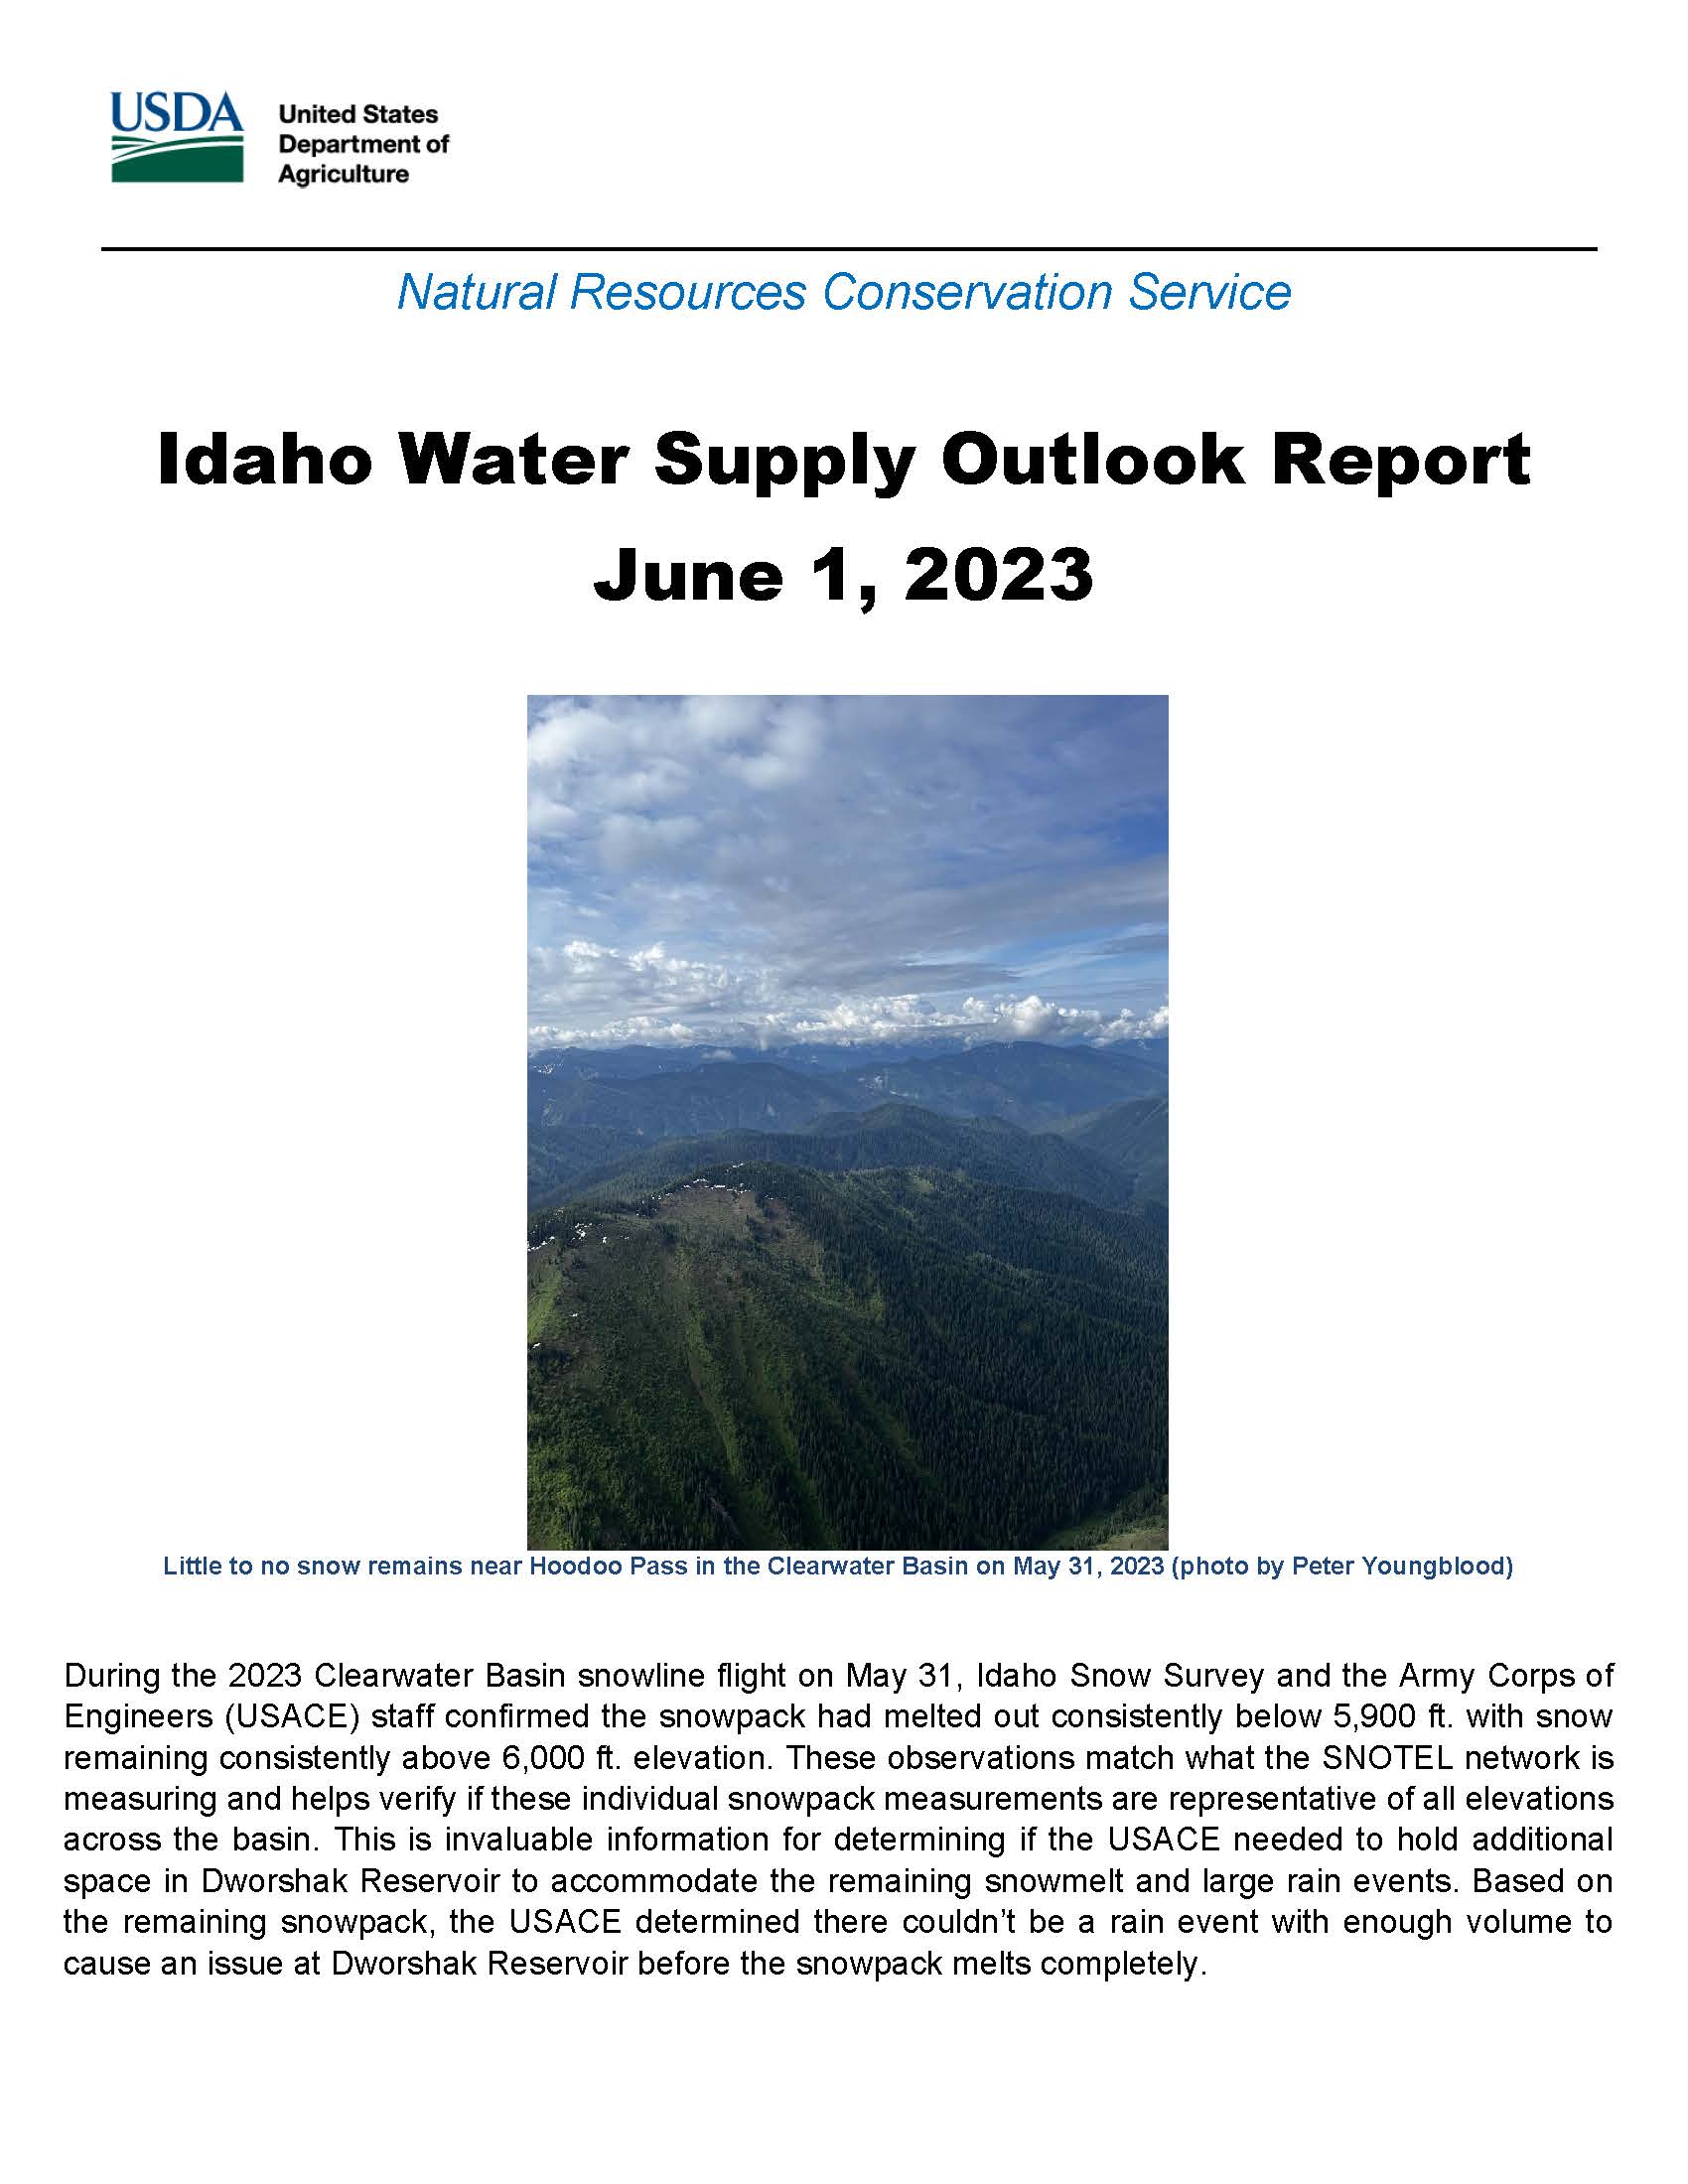 The June 1, 2023 Water Supply Report is coming soon!